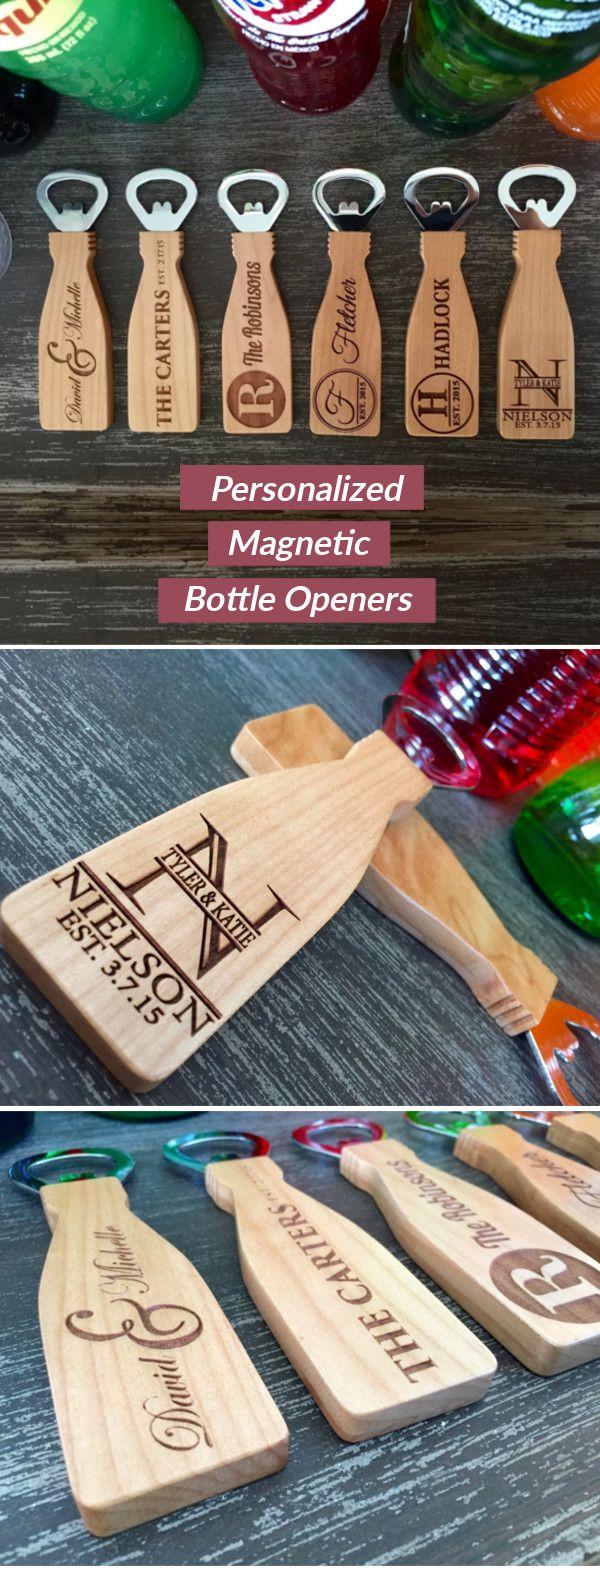 Hochzeit - Personalized Magnetic Bottle Openers - 6 Classic Designs!